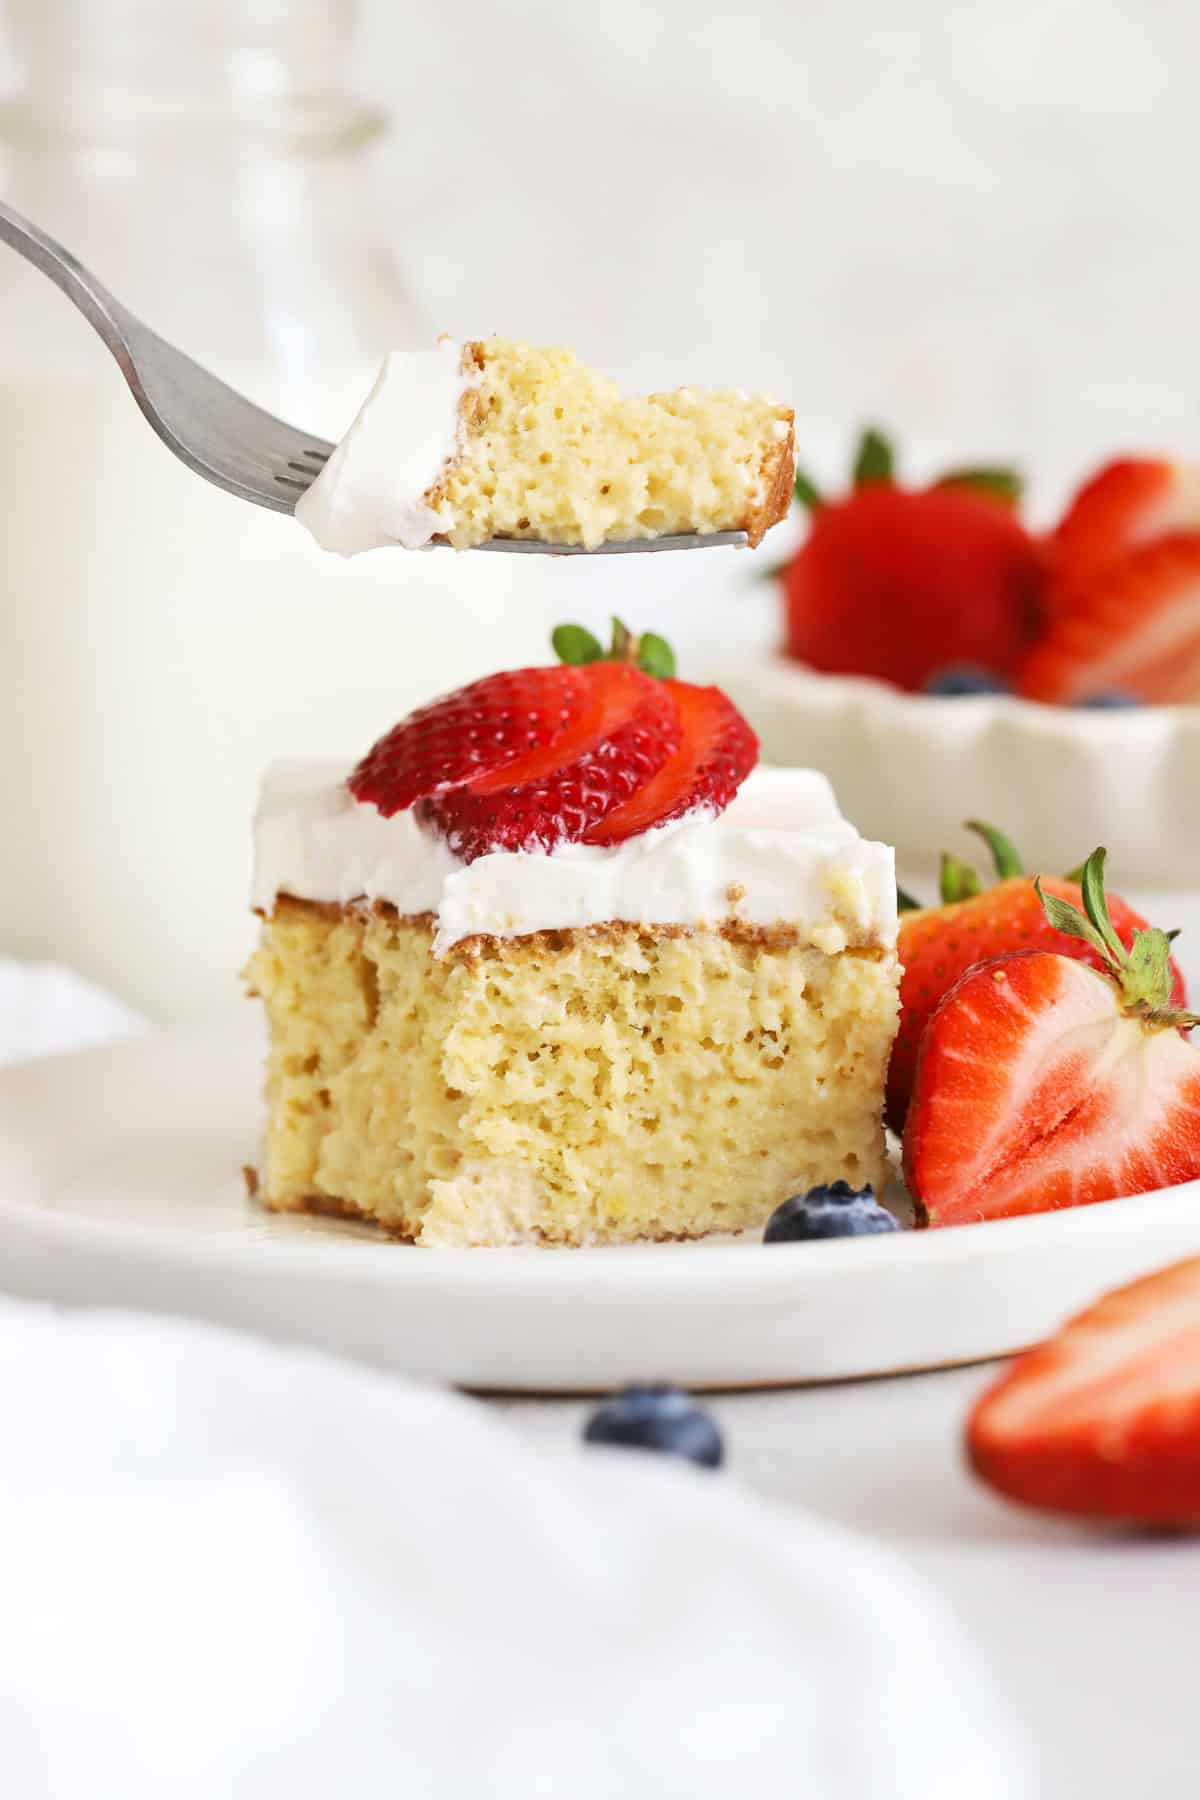 A fork getting a bite out of a slice of gluten-free tres leches cake